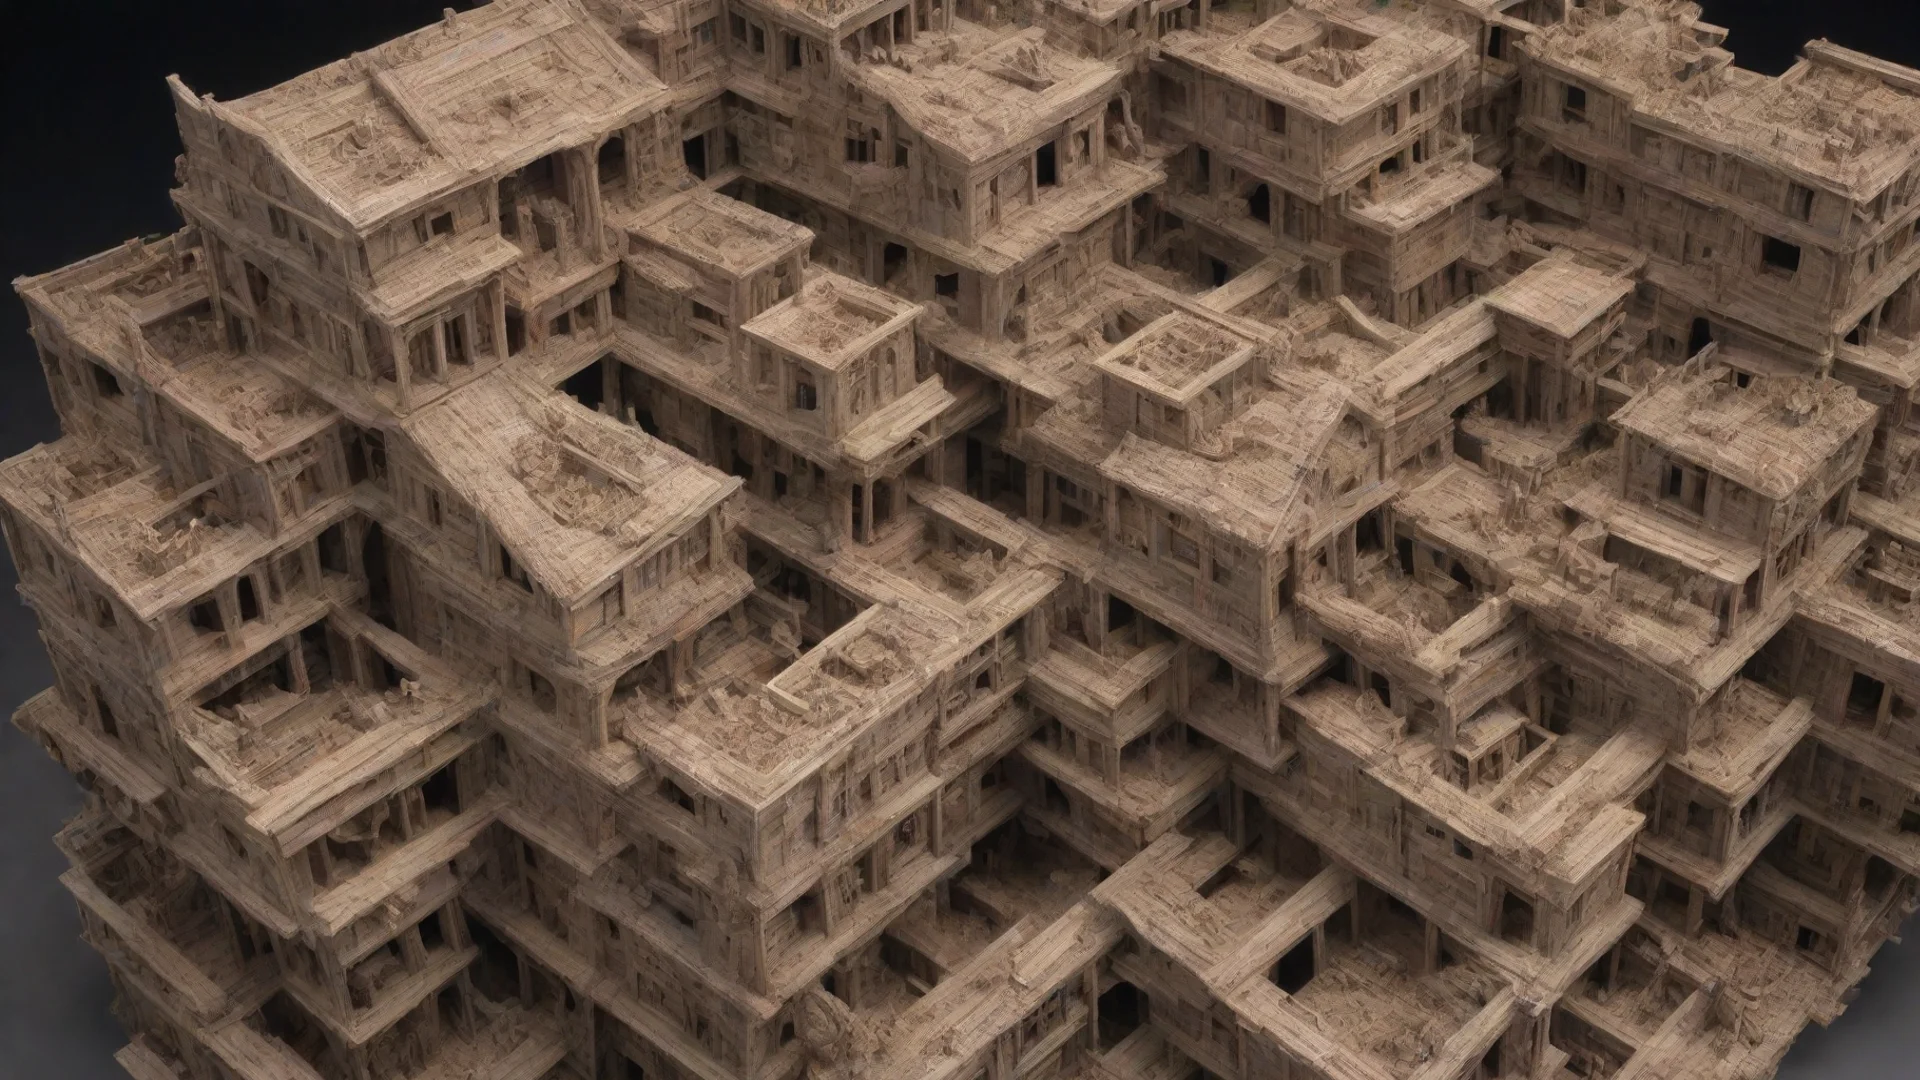 artstation art a swarm of parts intertwined upside down escher paradox kitbash greeble timber construction building in a building socia confident engaging wow 3 wide